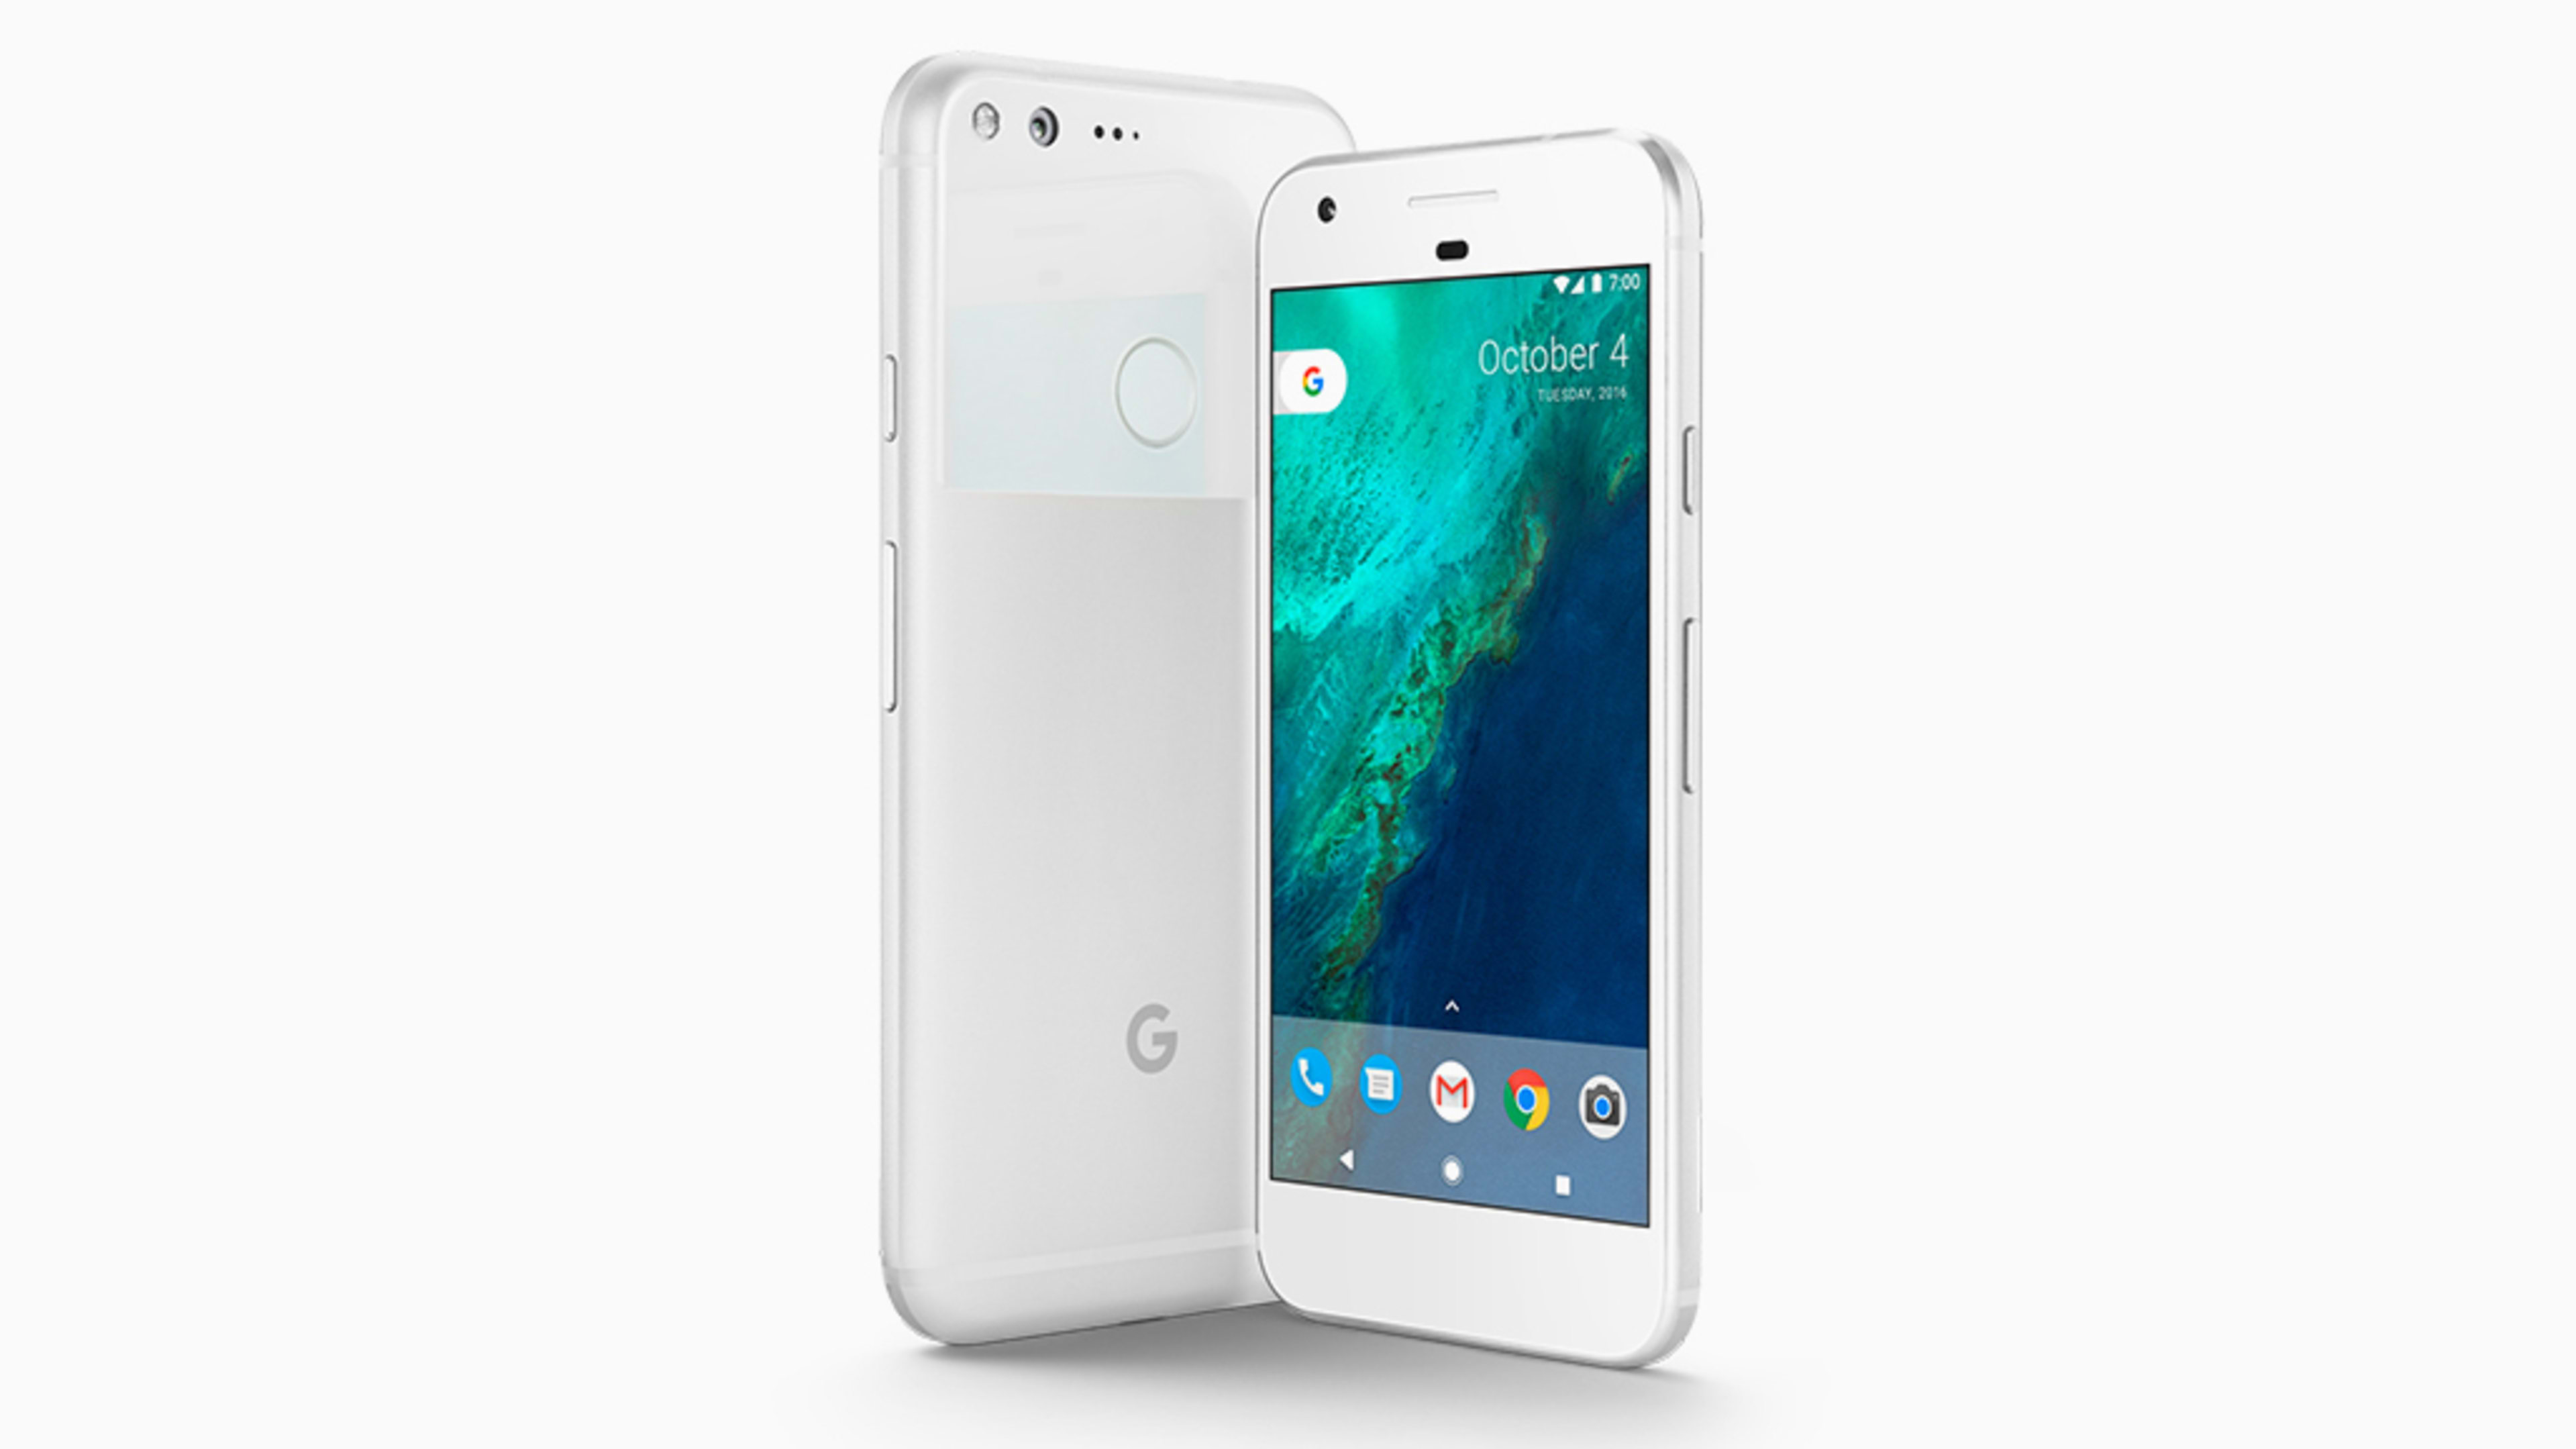 Here’s what Google announced at its “Made By Google” Pixel event